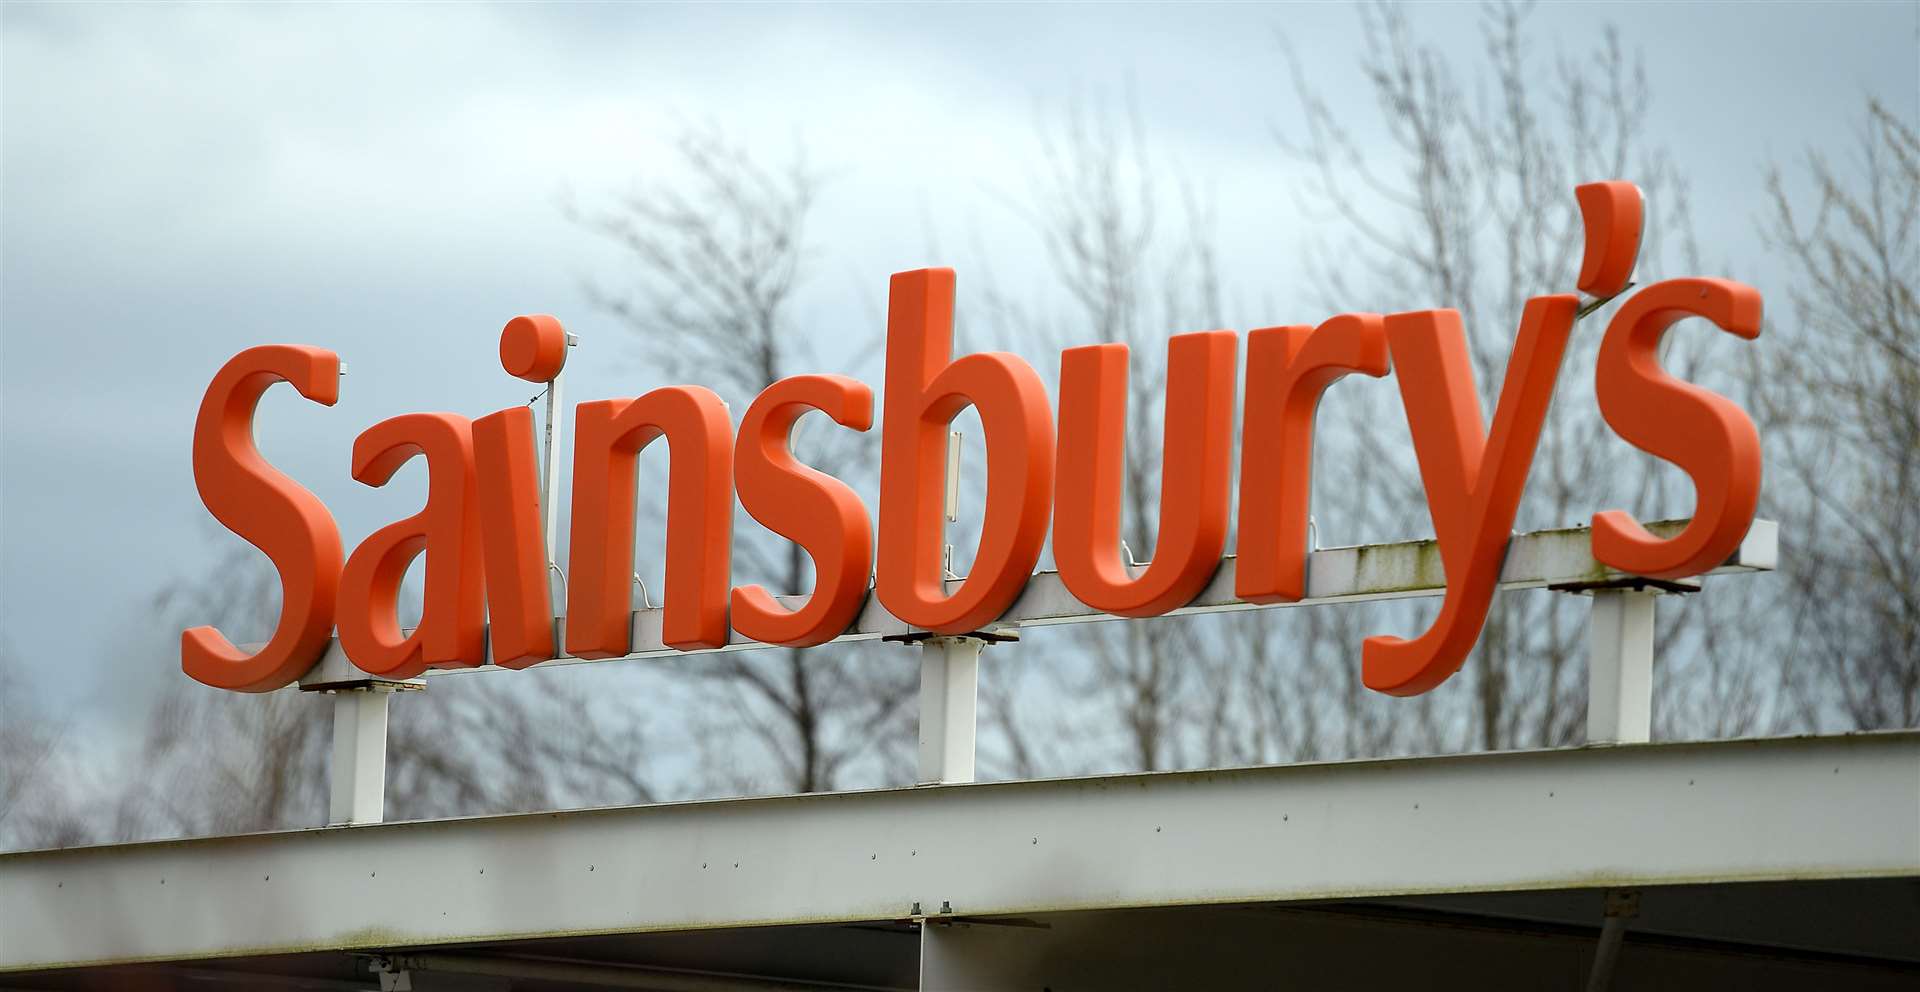 Sainsbury’s sold the cheapest school uniforms, according to Which? analysis (Andrew Matthews/PA)